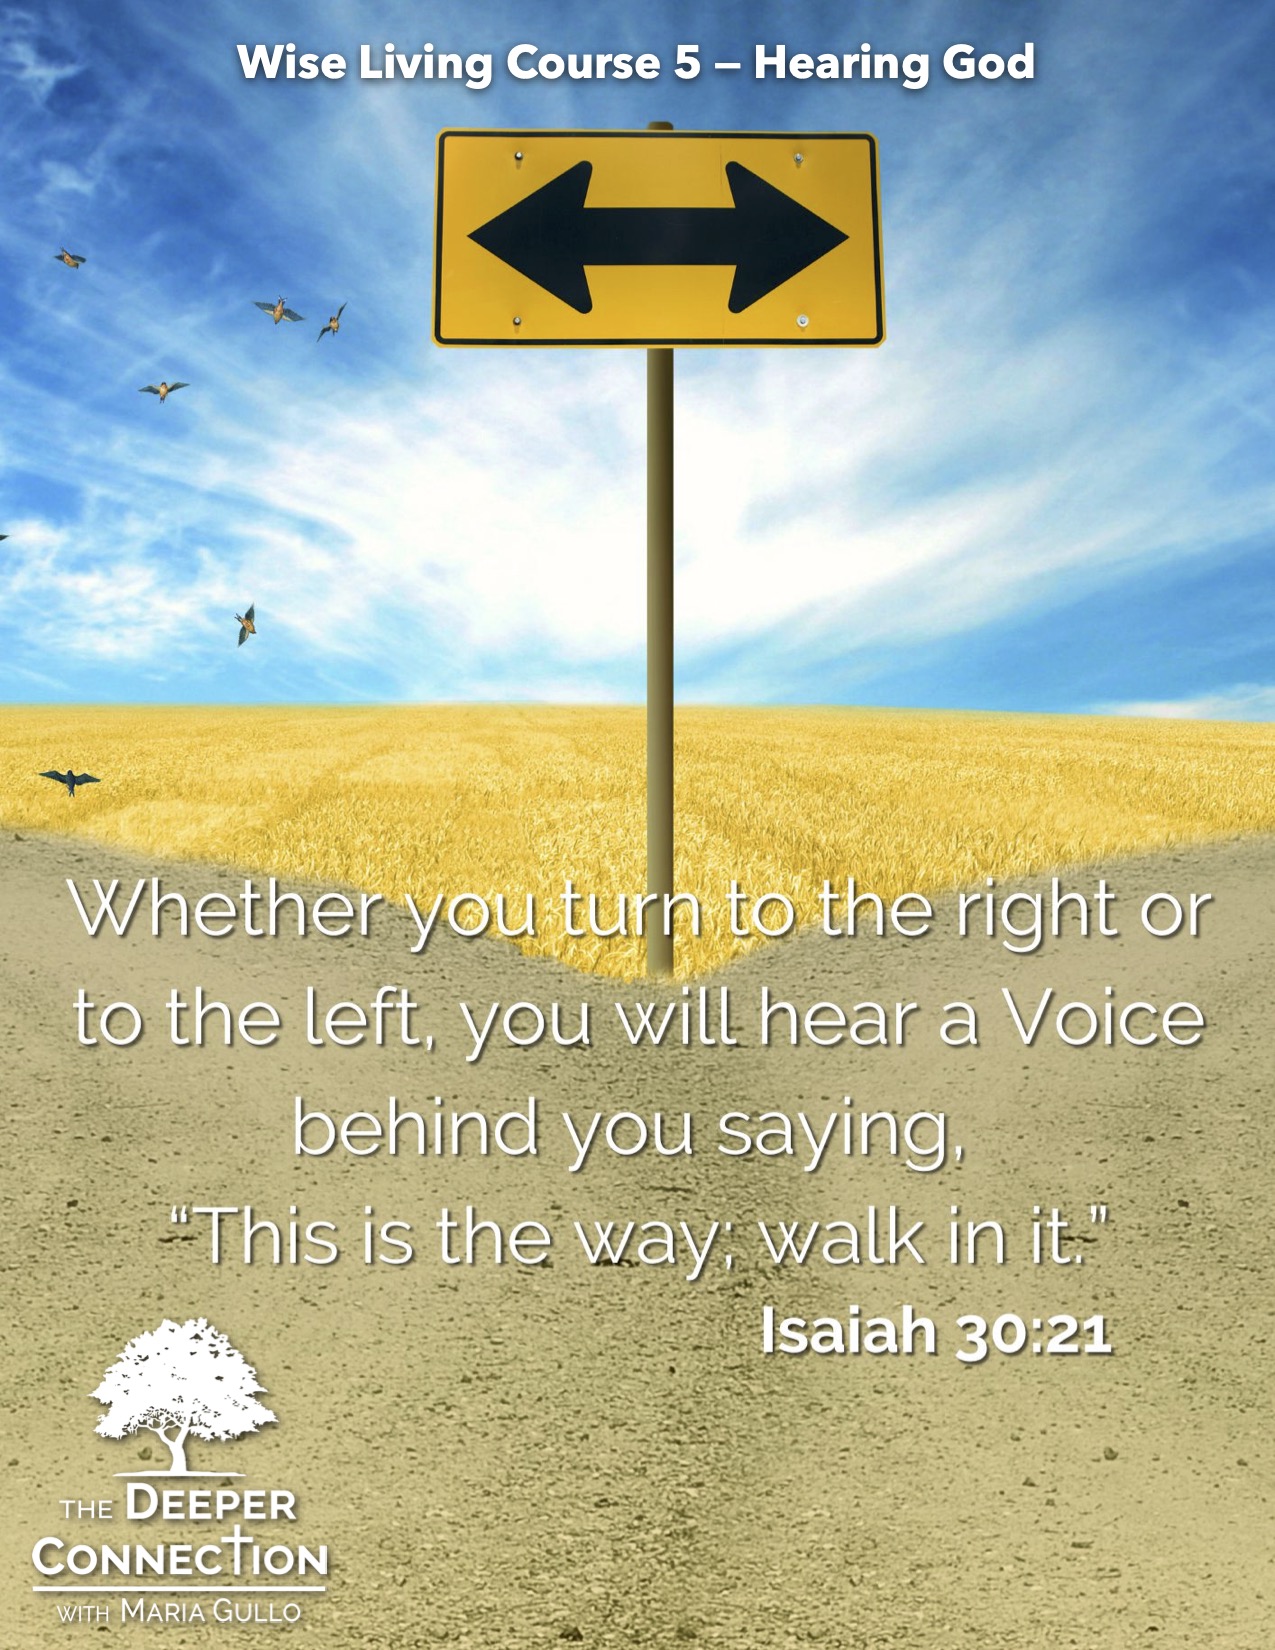 Wise Living Course 5 – Hearing God